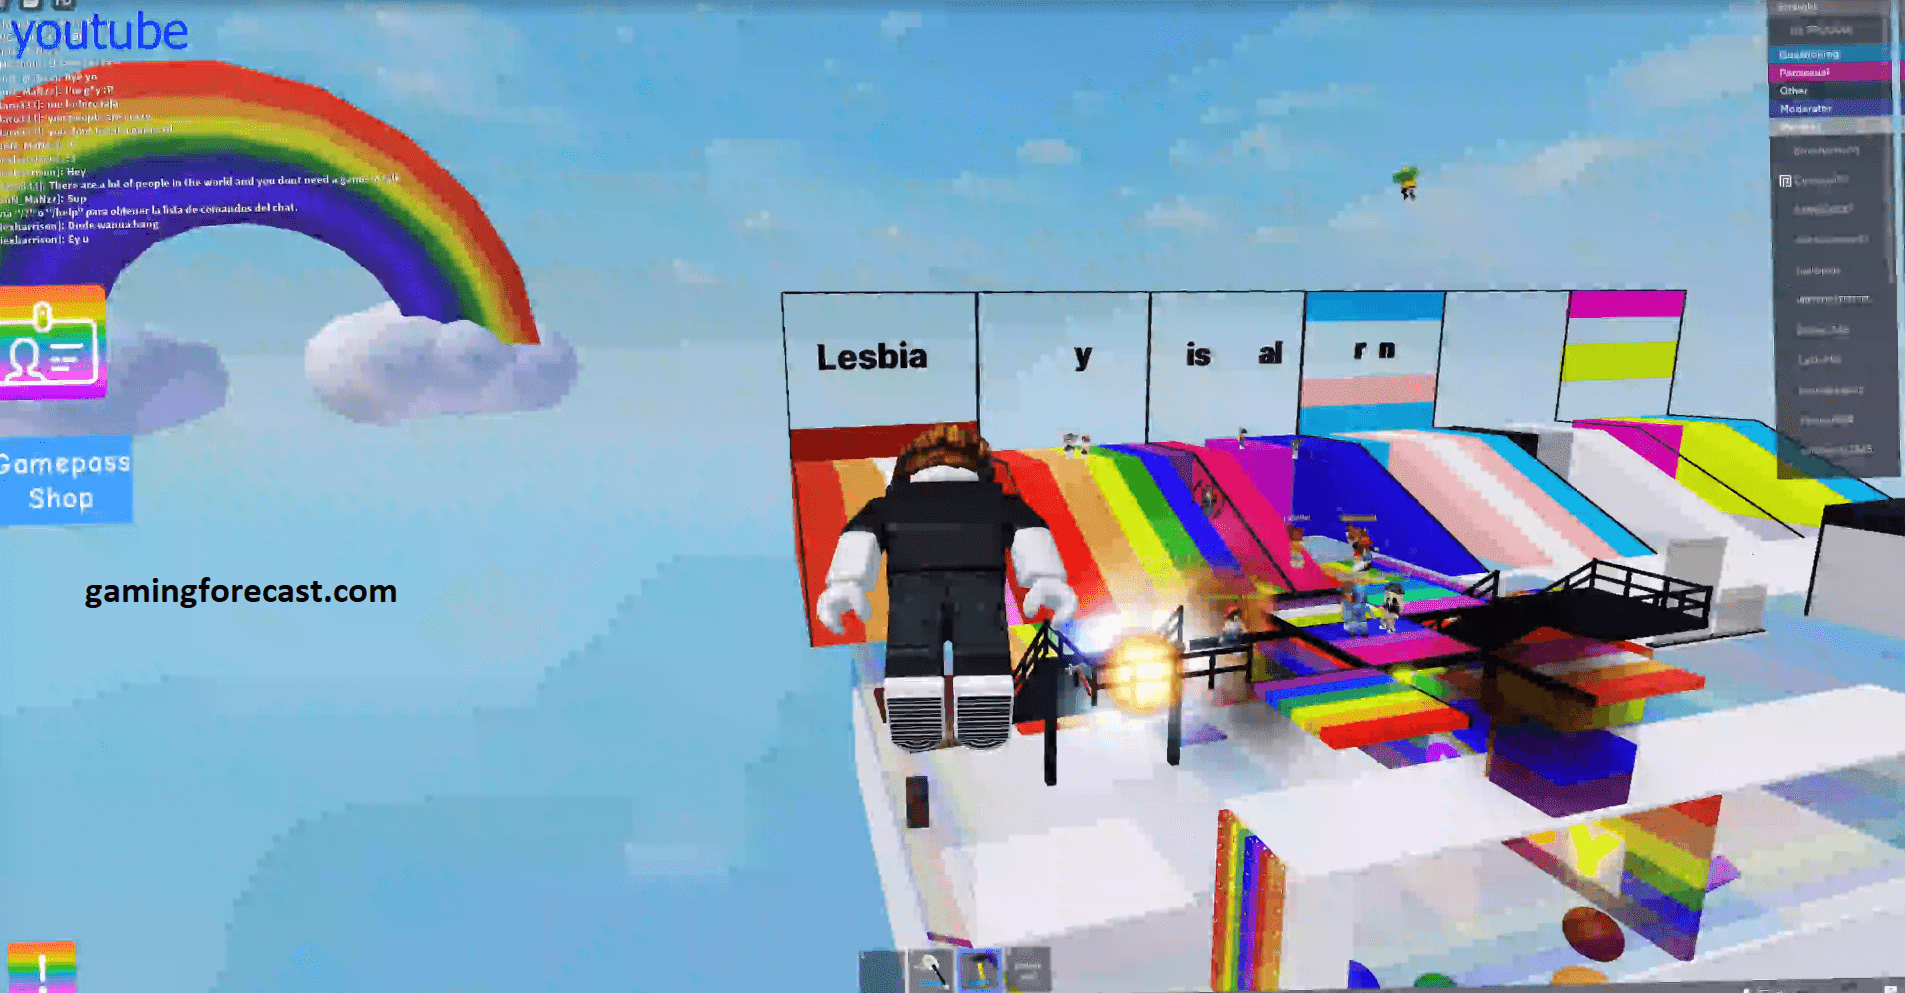 Roblox Hack Download Pc Destroy Lobby Fly Aimbot Scripts 2021 Gaming Forecast Download Free Online Game Hacks - hacker de fly roblox